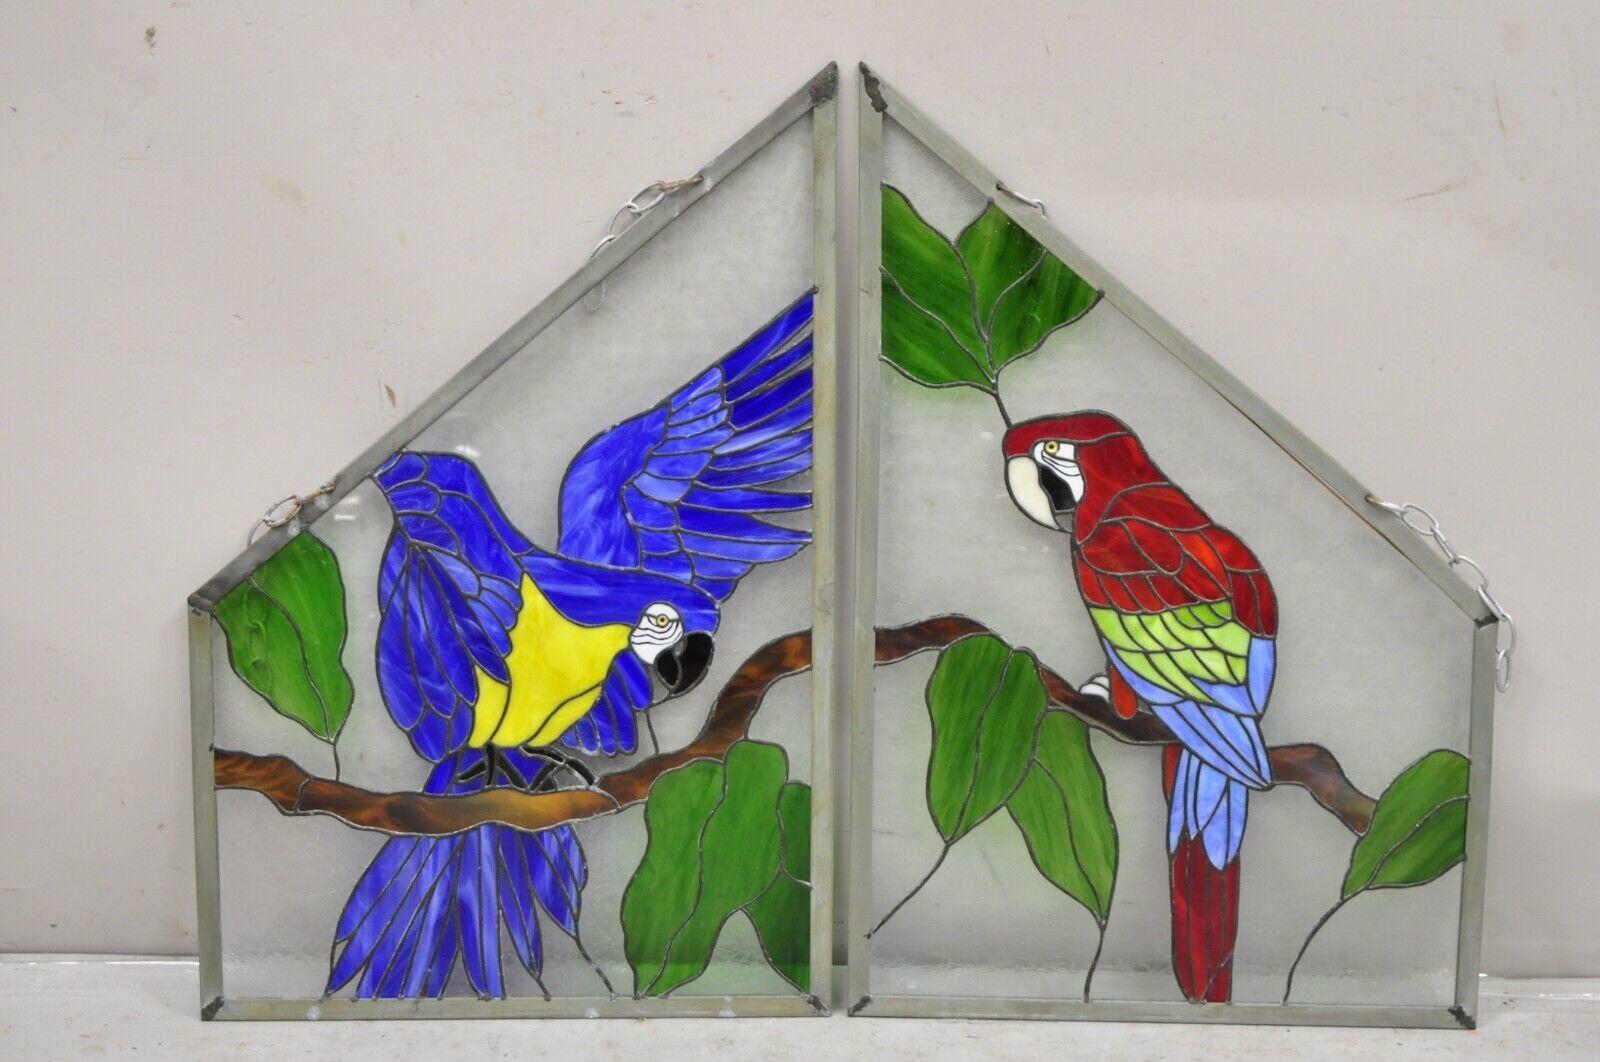 Vintage Leaded Stained Glass Red and Blue Parrot Bird Window Suncatchers - a Pair. Circa Late 20th Century. Measurements: Each: 33